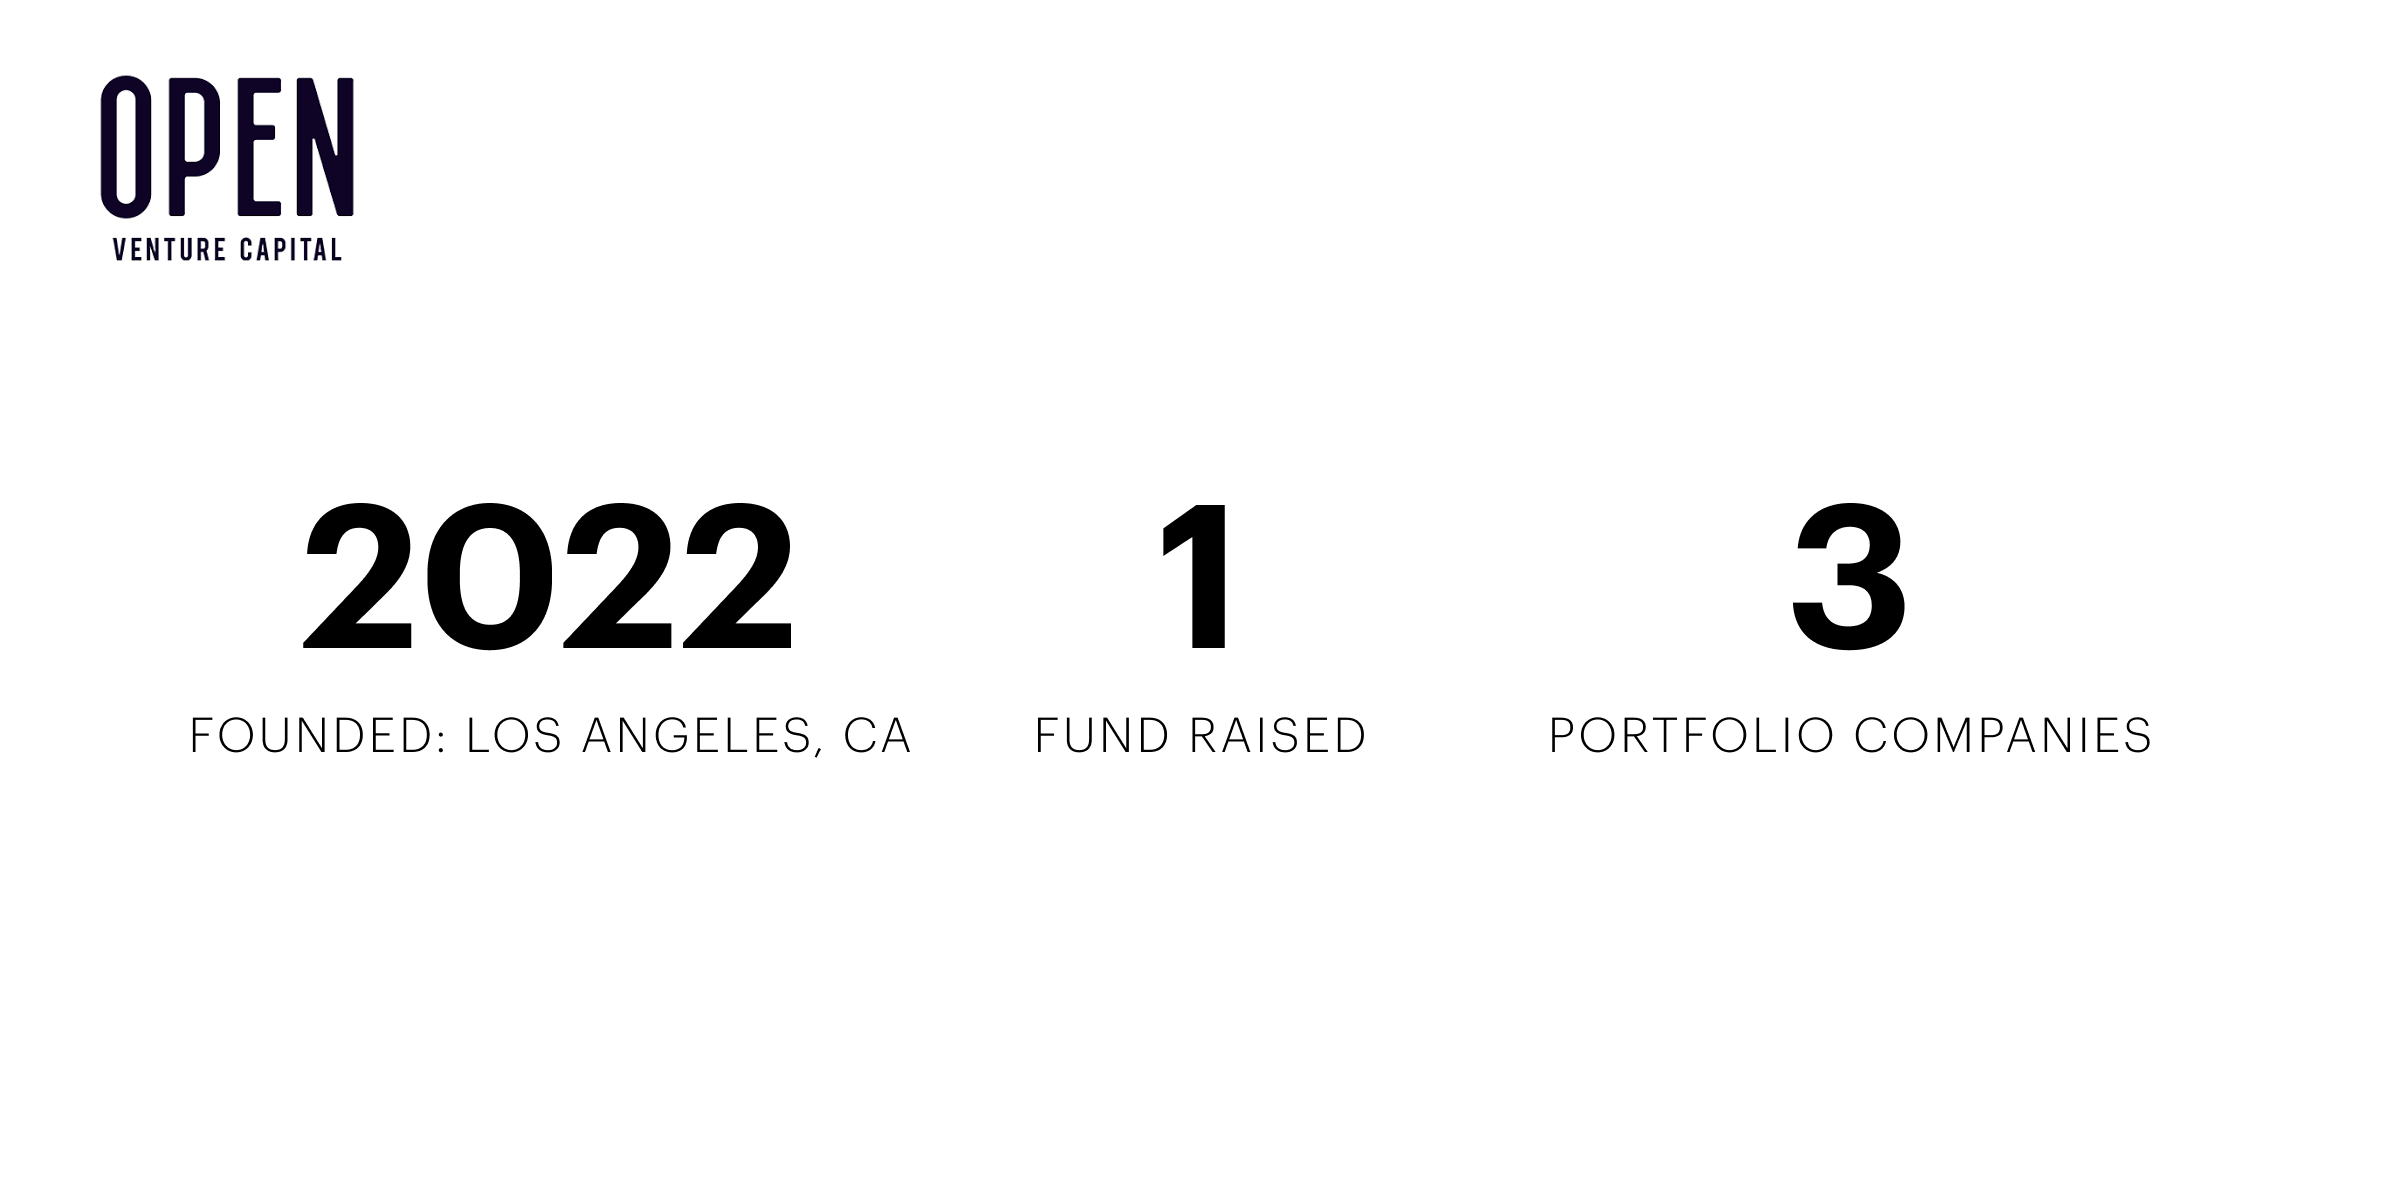 Open Venture Capital was founded in LA in 2022, raised one fund, and has three portfolio companies.